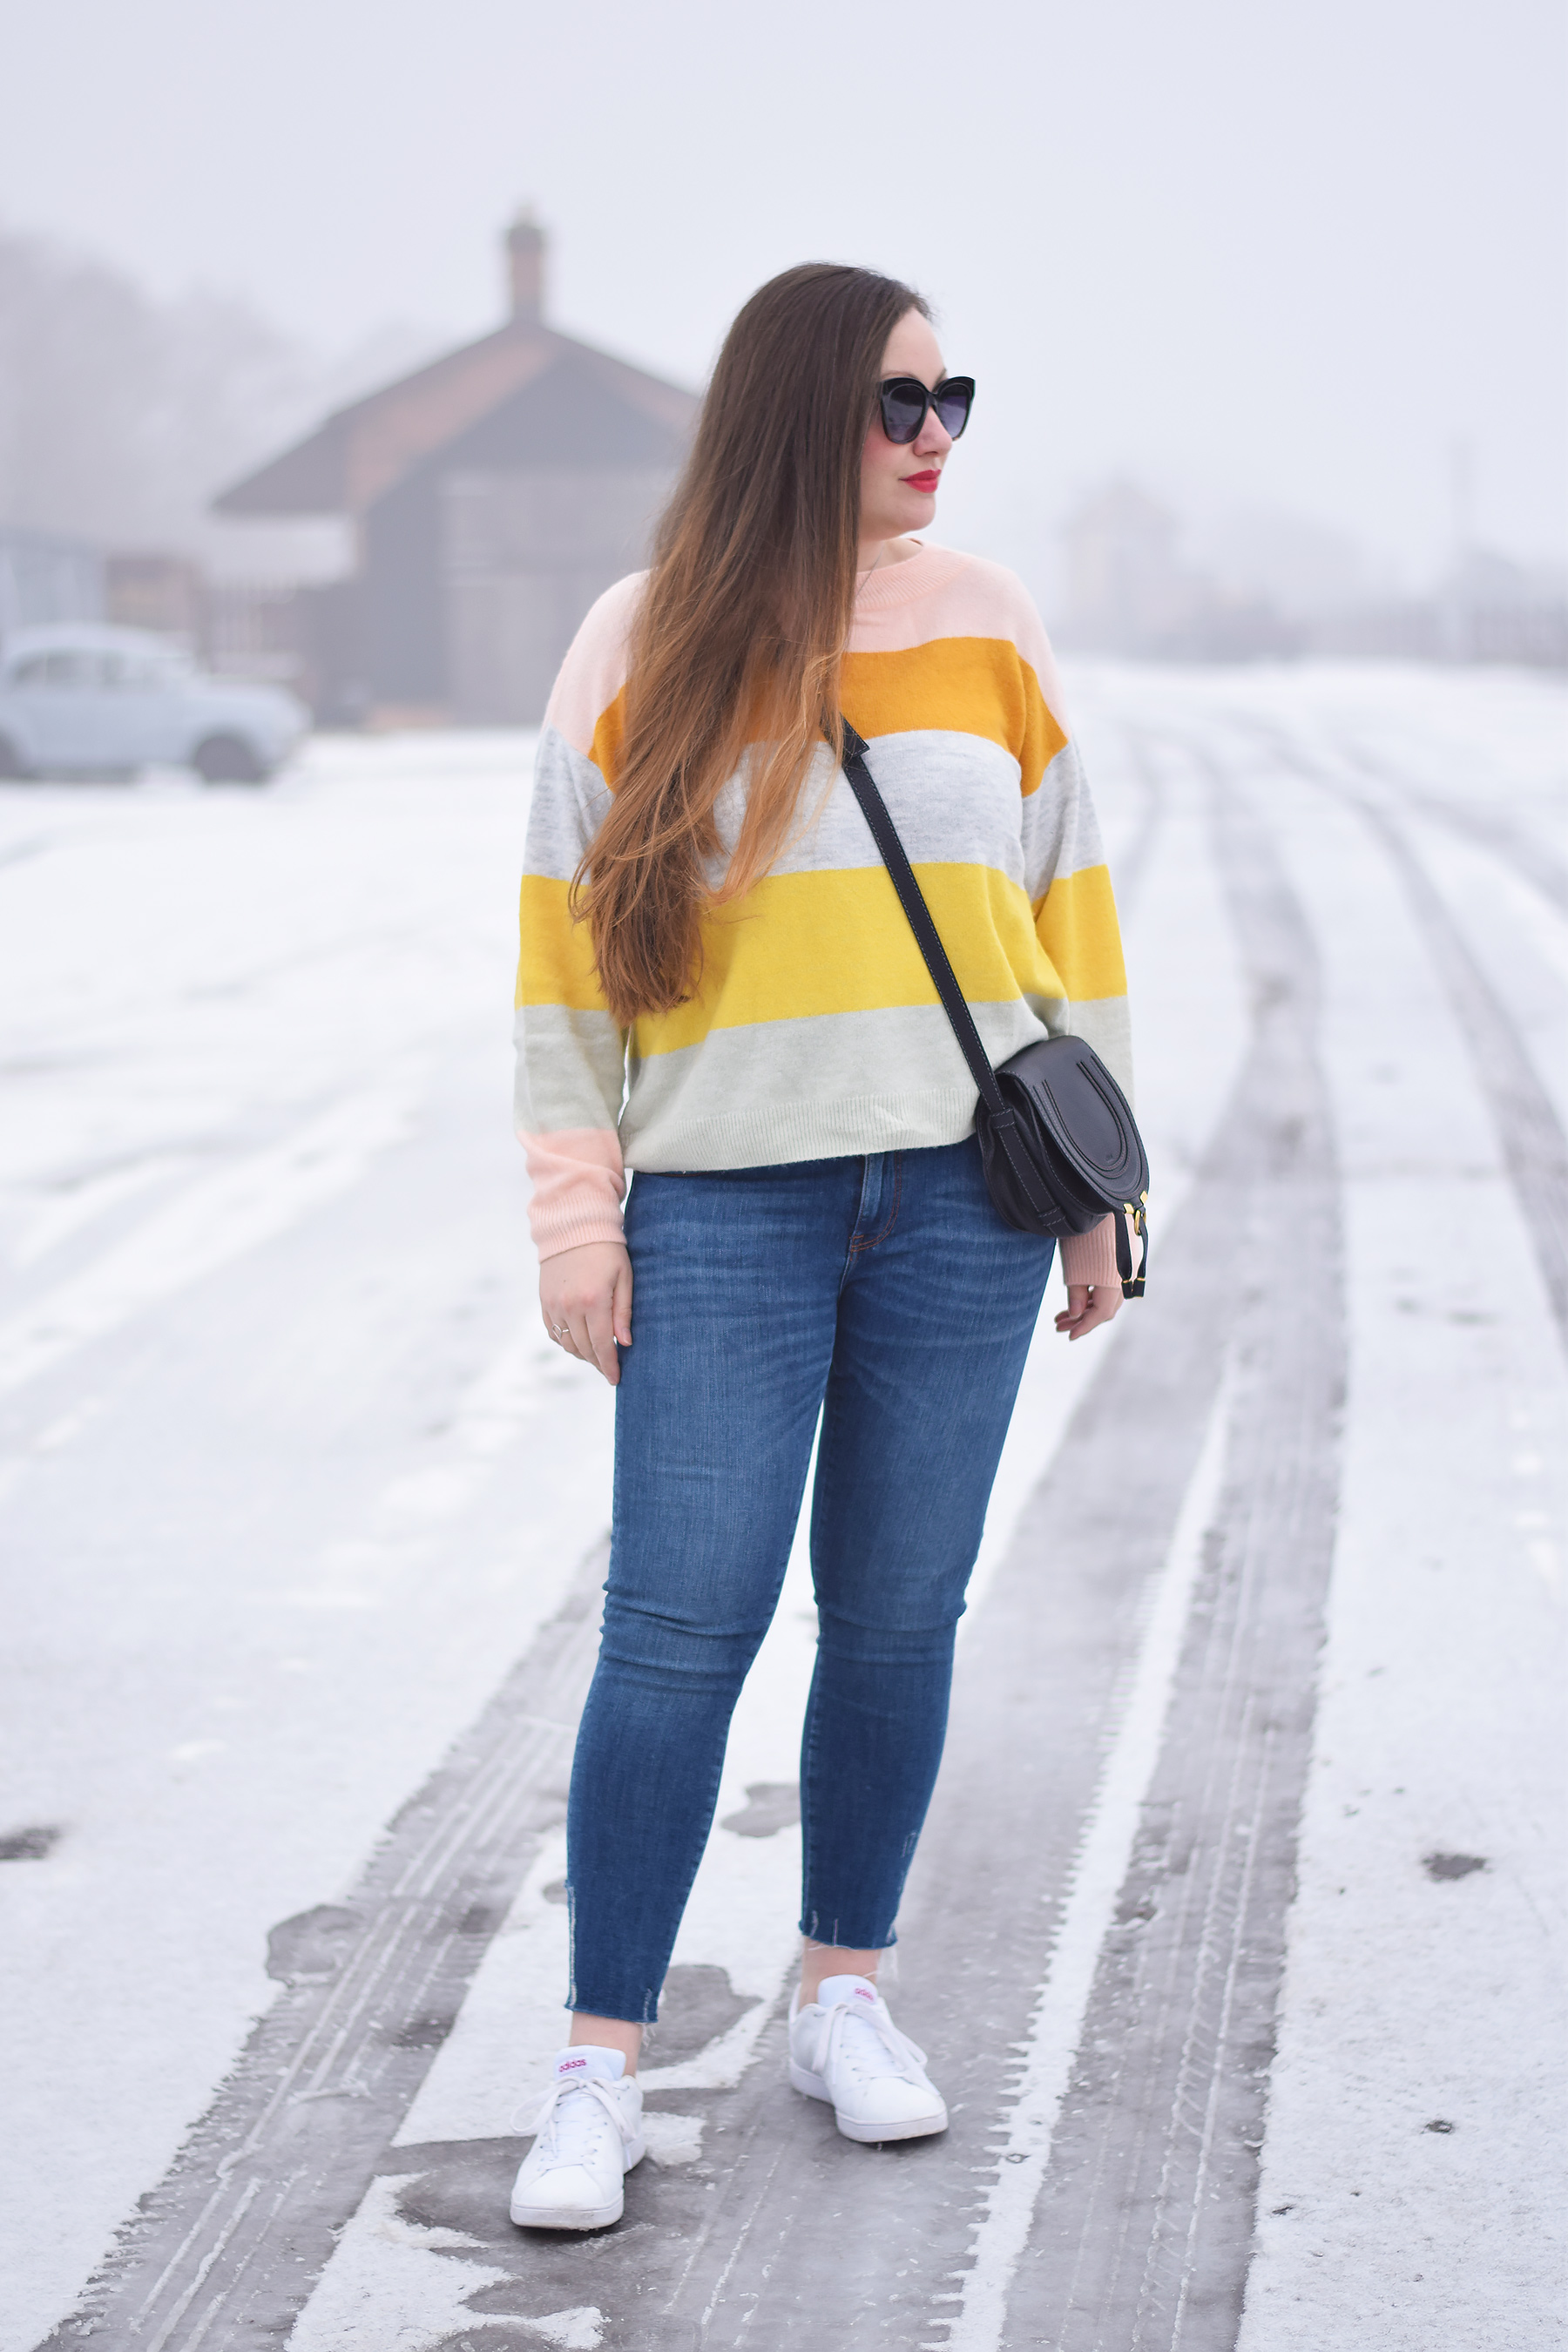 Pastel Striped Jumper Outfit 2018